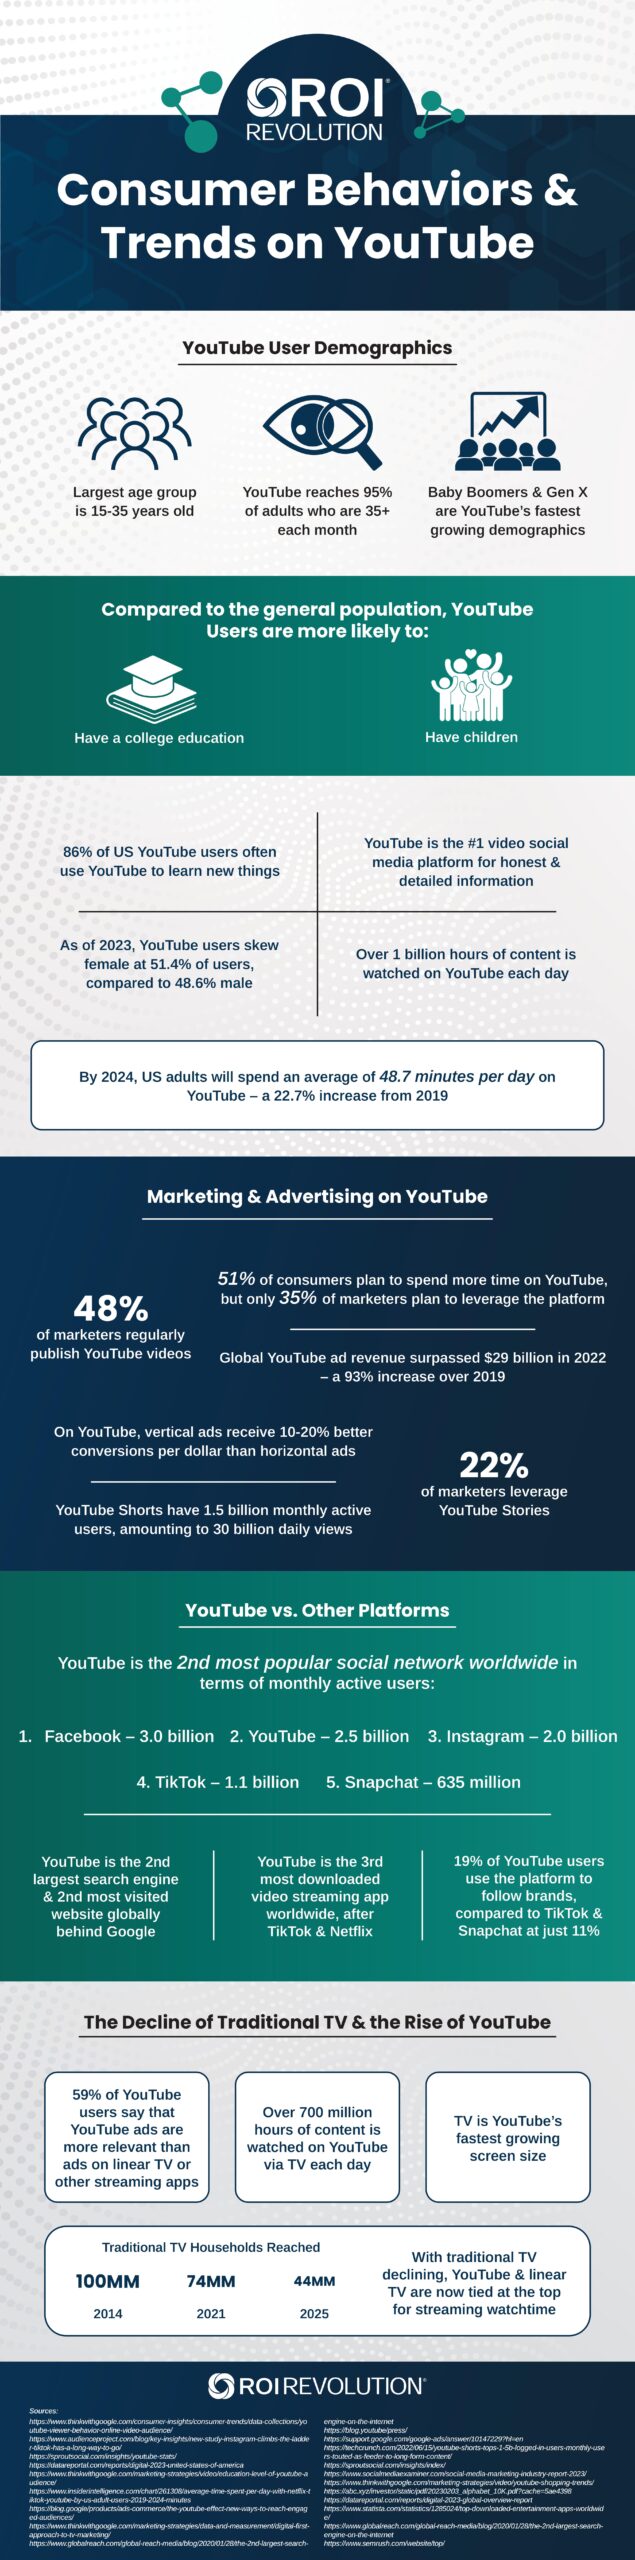 Infographic detailing YouTube consumer behaviors and trends, including demographics, website behavior, year over year trends, and more.